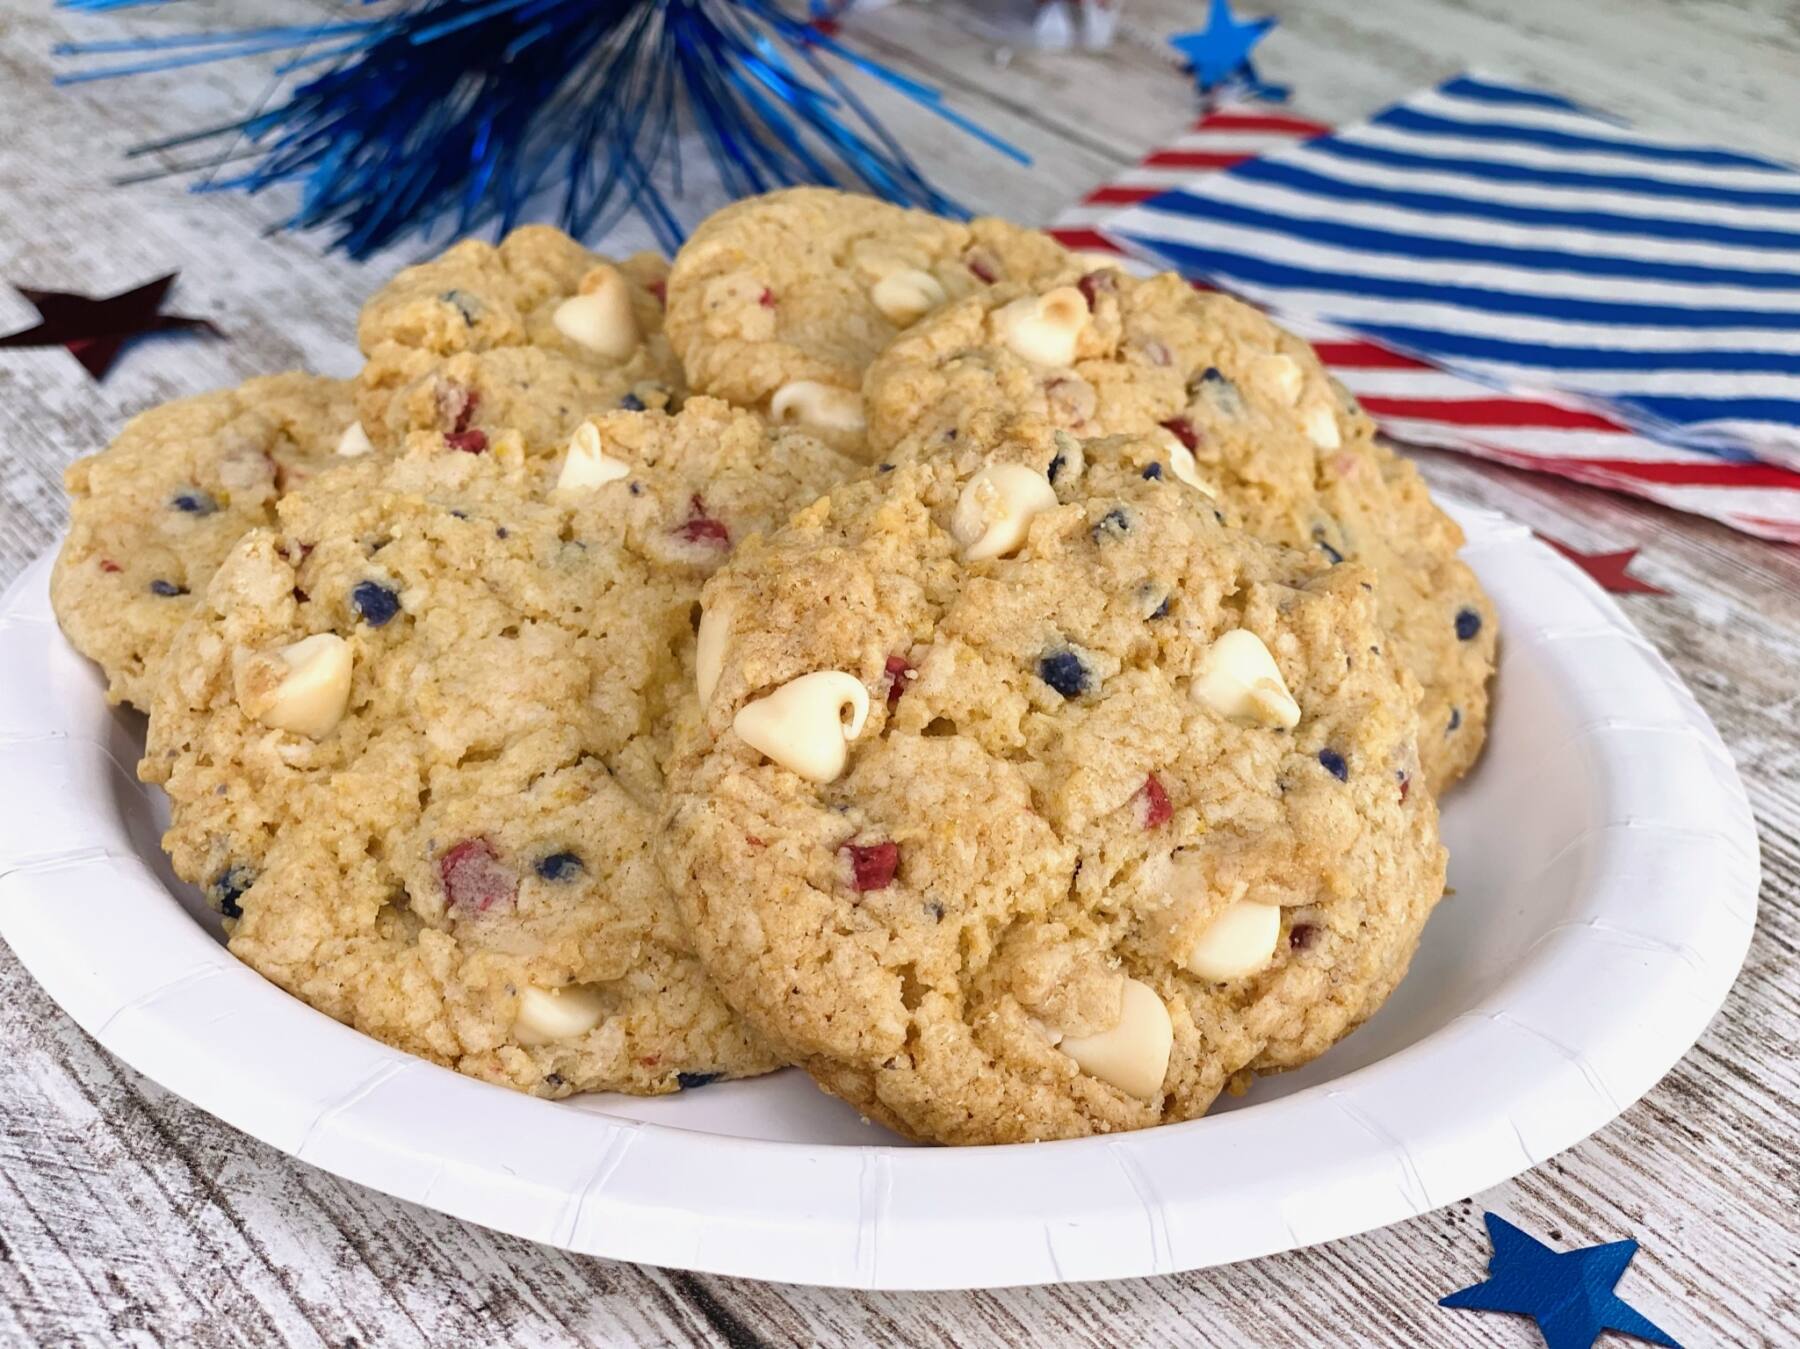 Photo: 4th of July Firecracker Cookies.